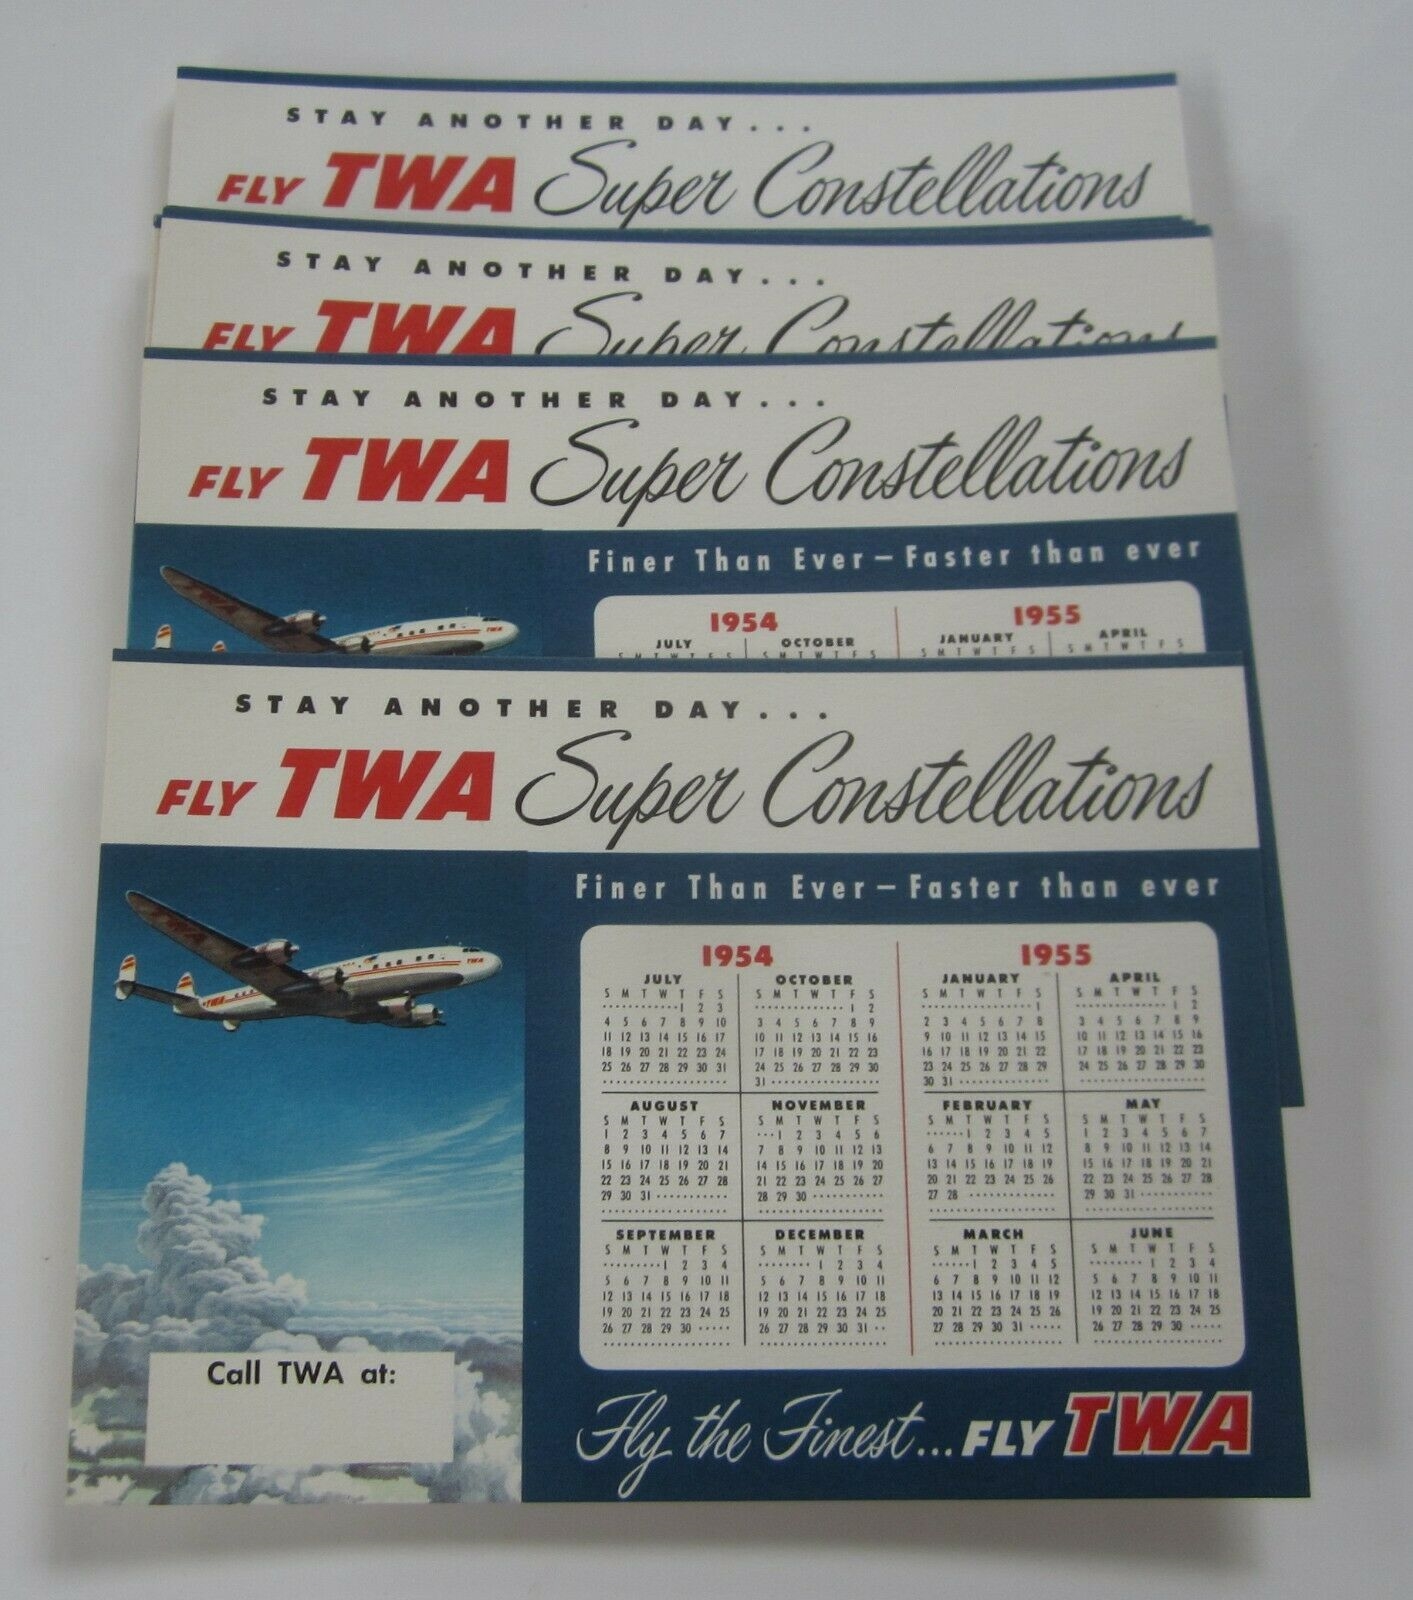  Lot of 25 Old 1954-55 TWA Airline Advertising ...